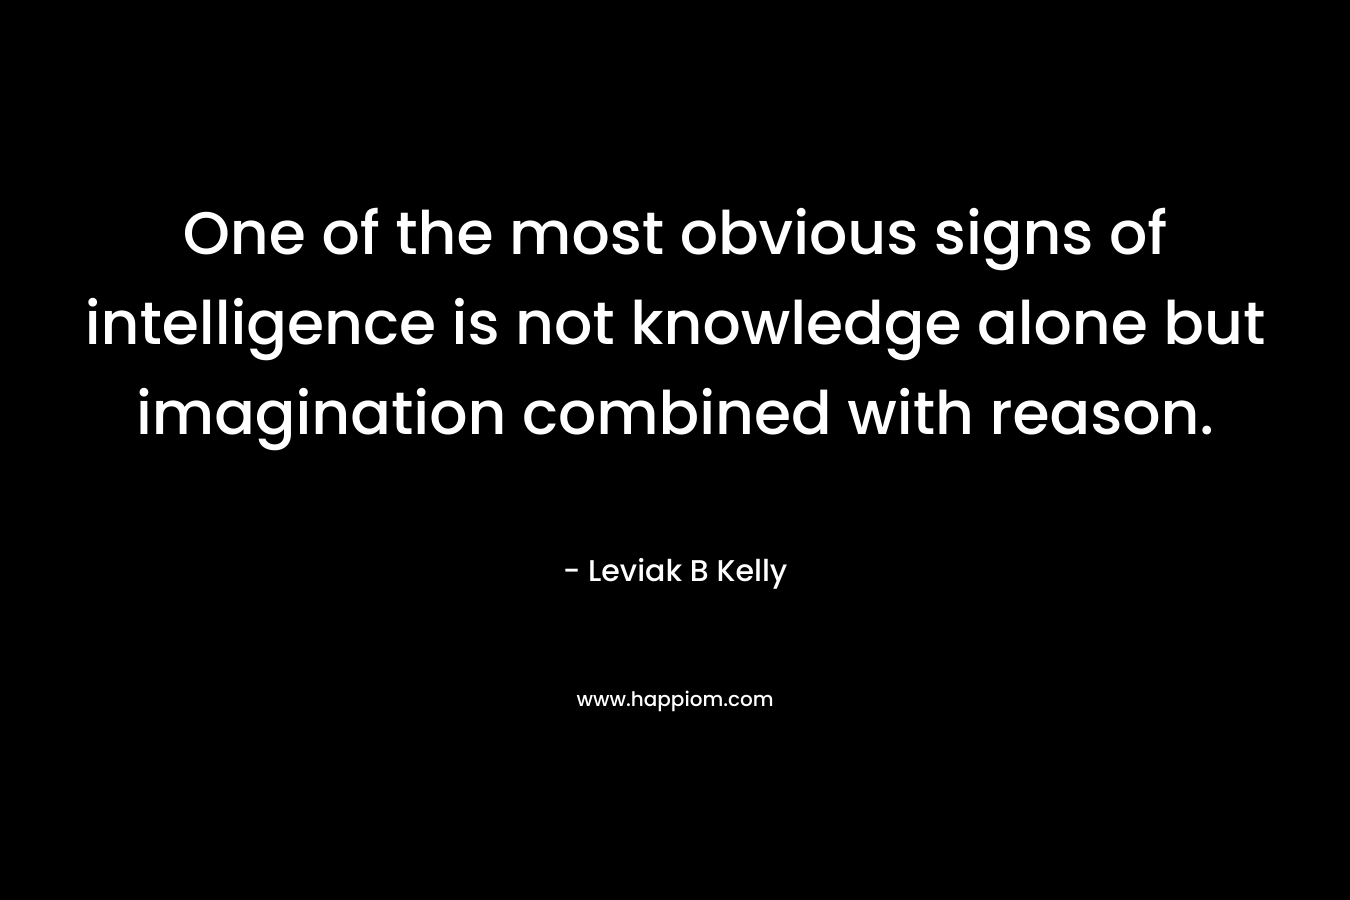 One of the most obvious signs of intelligence is not knowledge alone but imagination combined with reason.